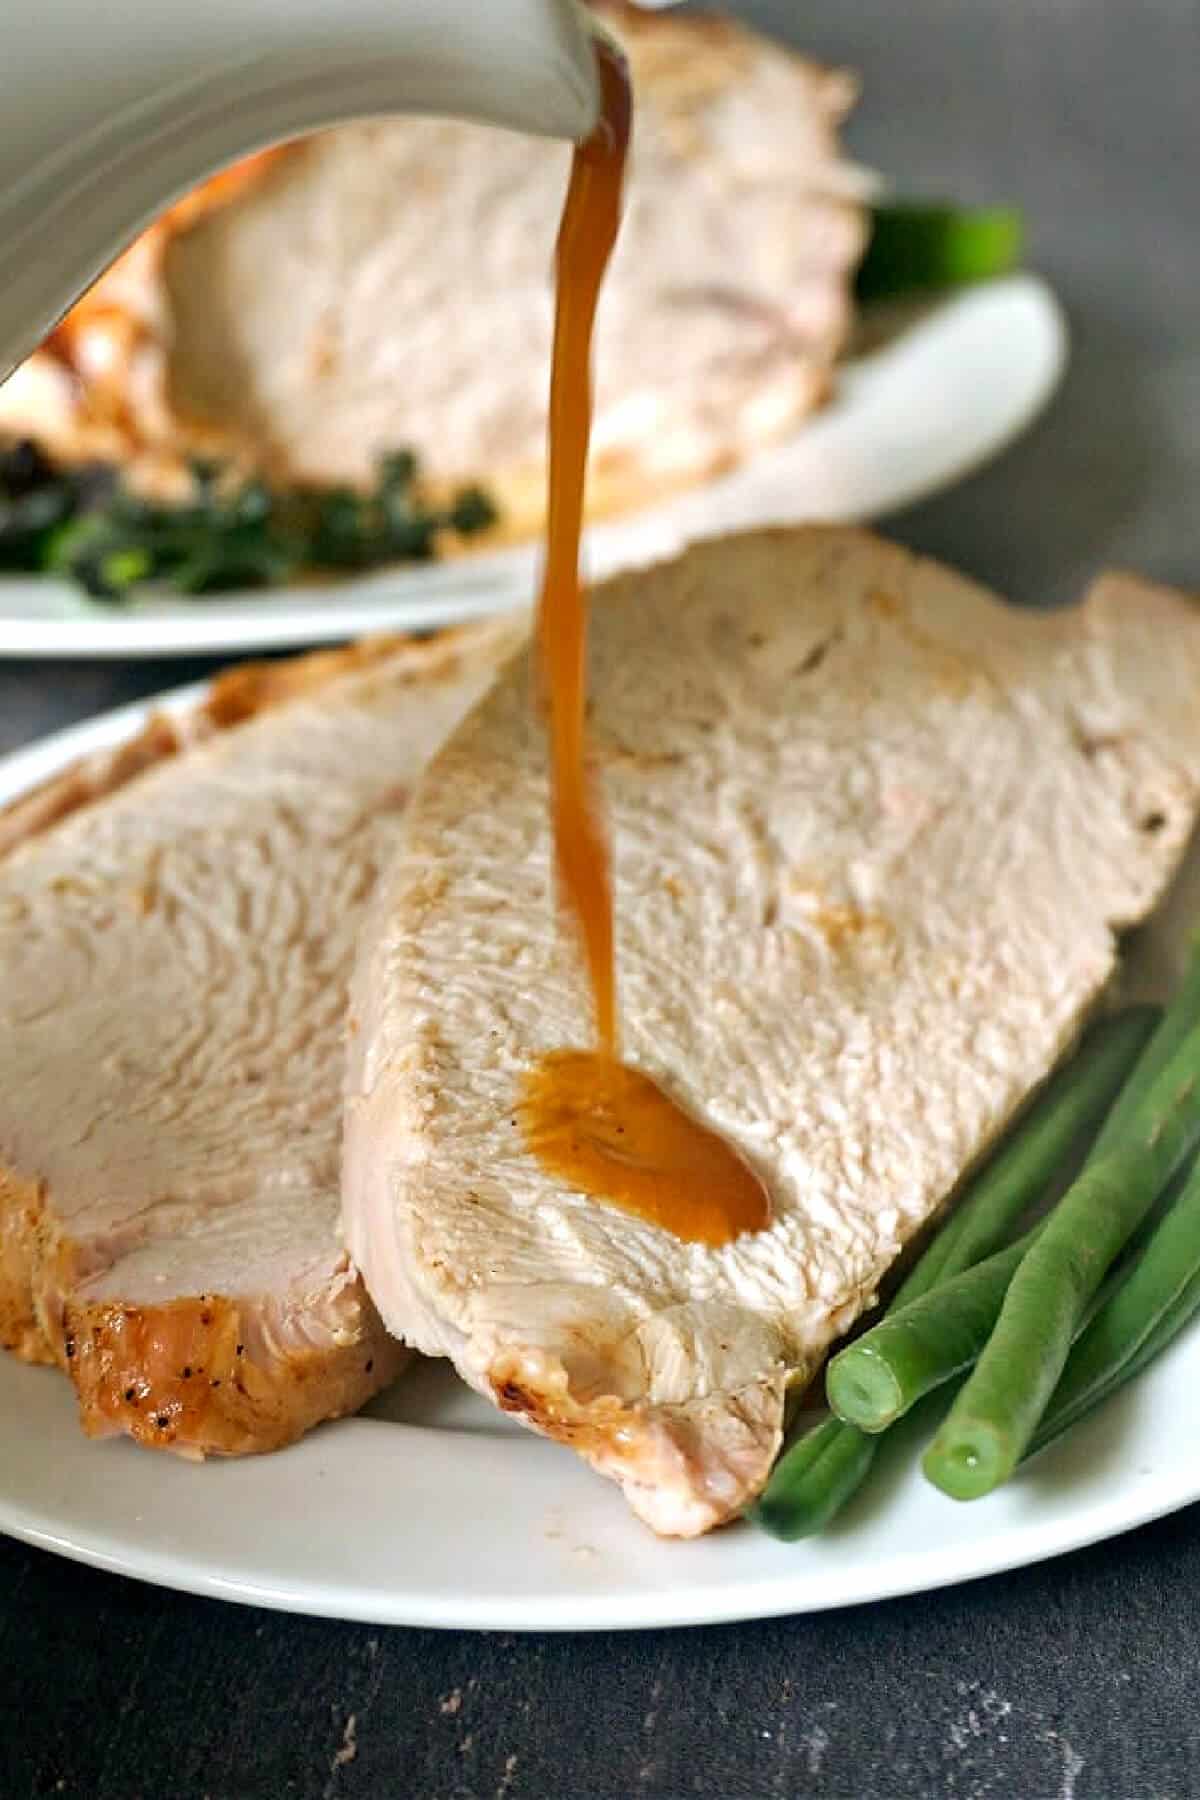 2 slices of turkey with gravy being drizzled over them.